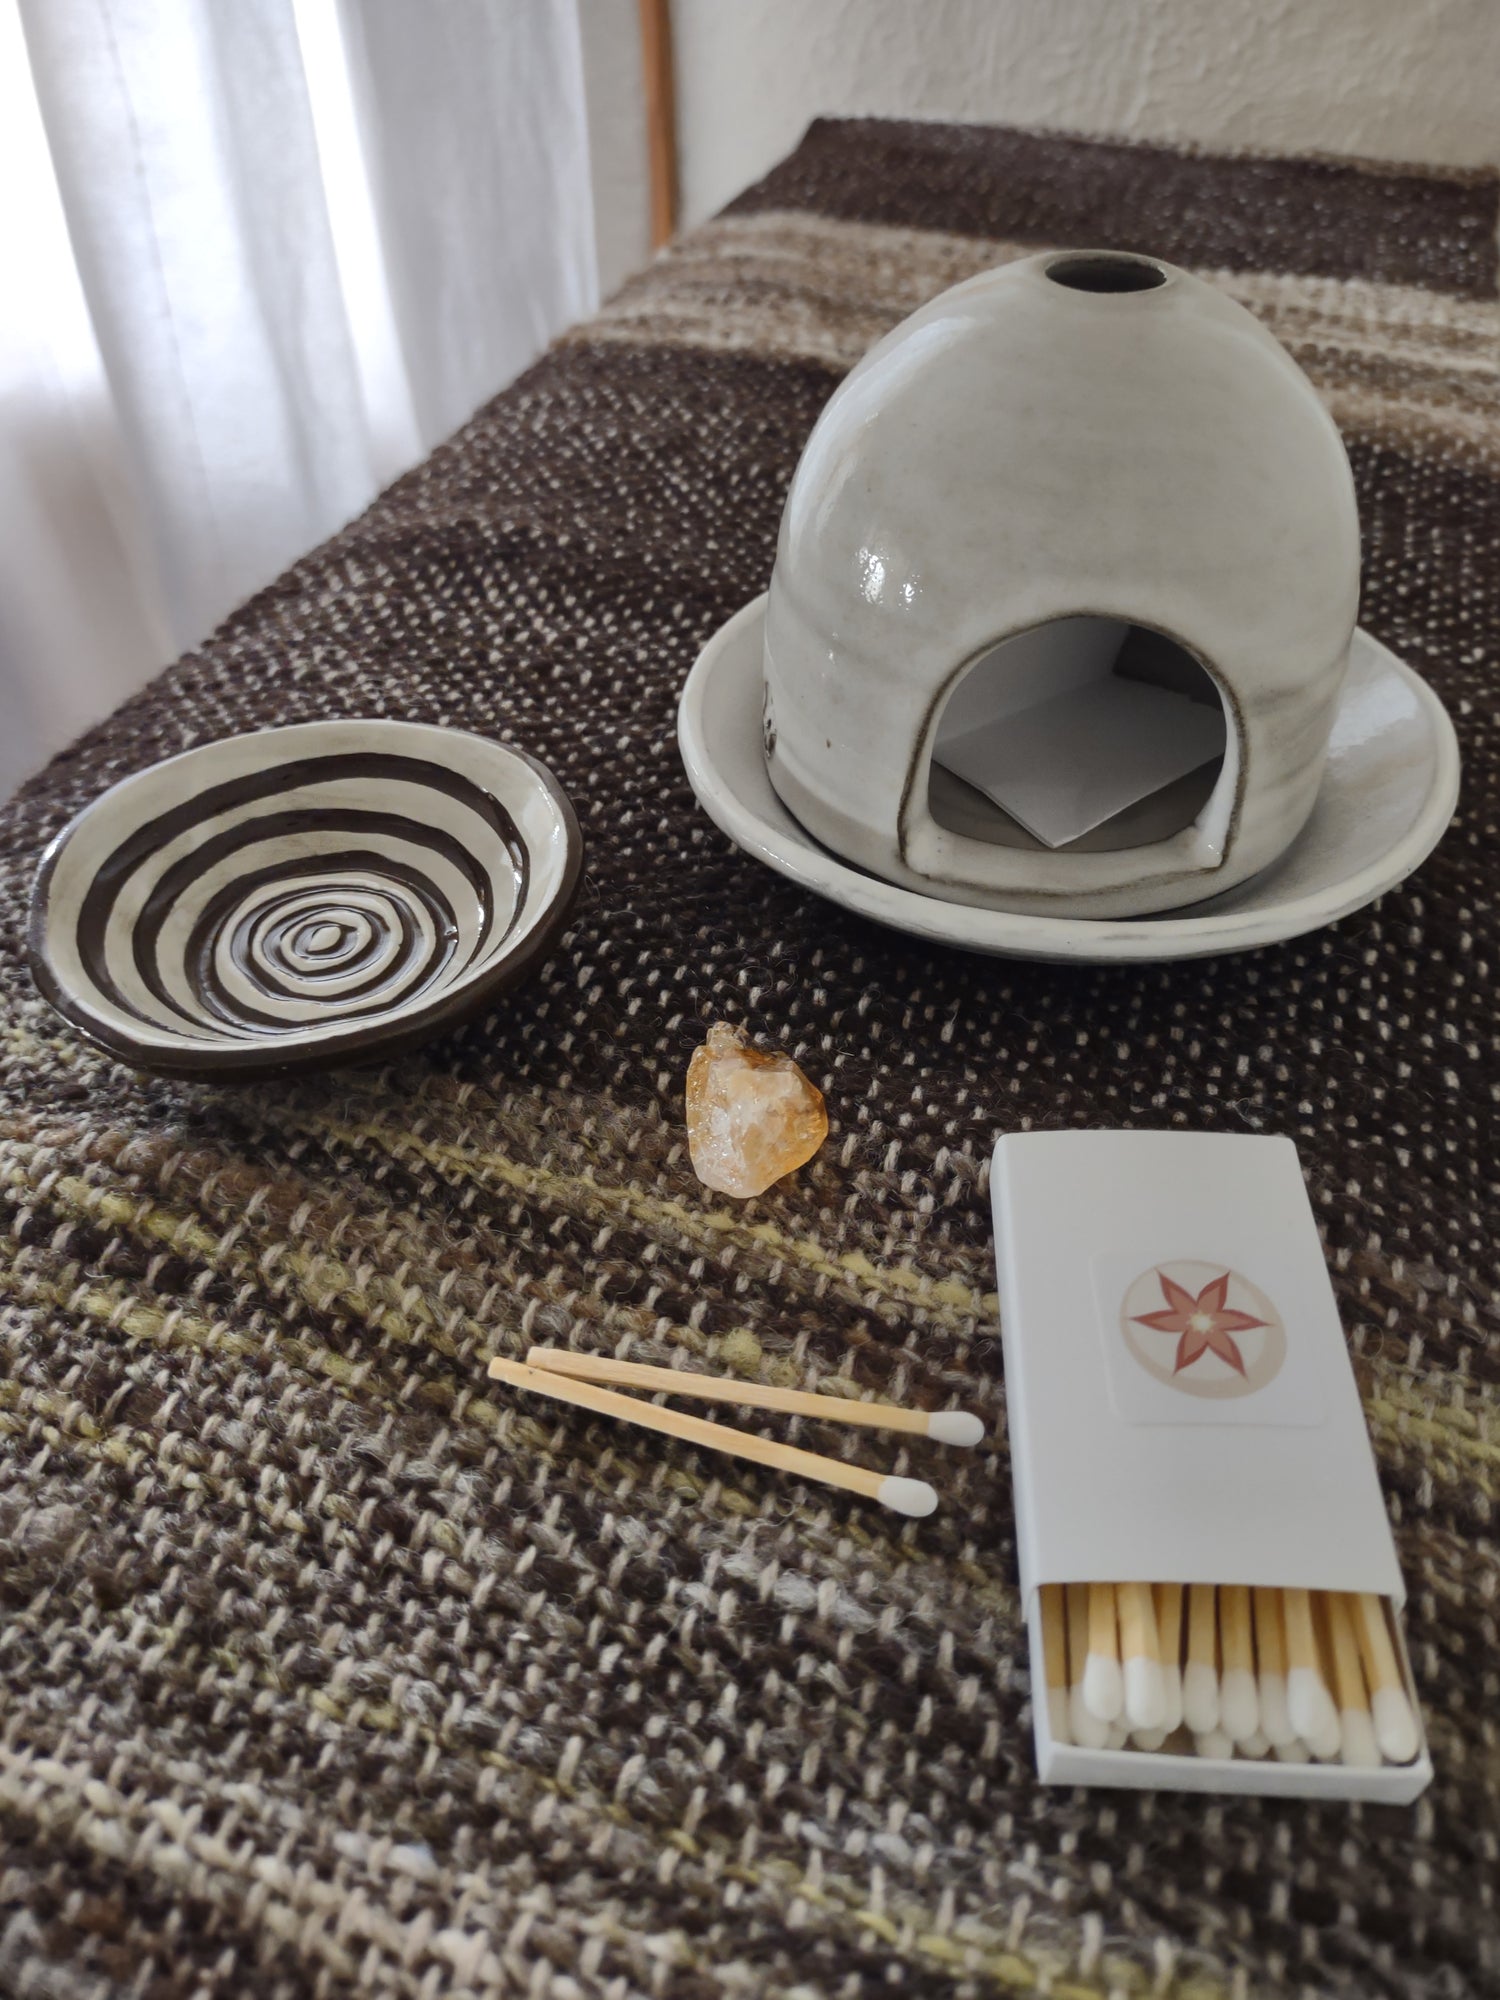 Ritual Hearth bundle with handwoven altar cloth, ceramic dish and handmade paper for prayer requests, manifesting and intention setting